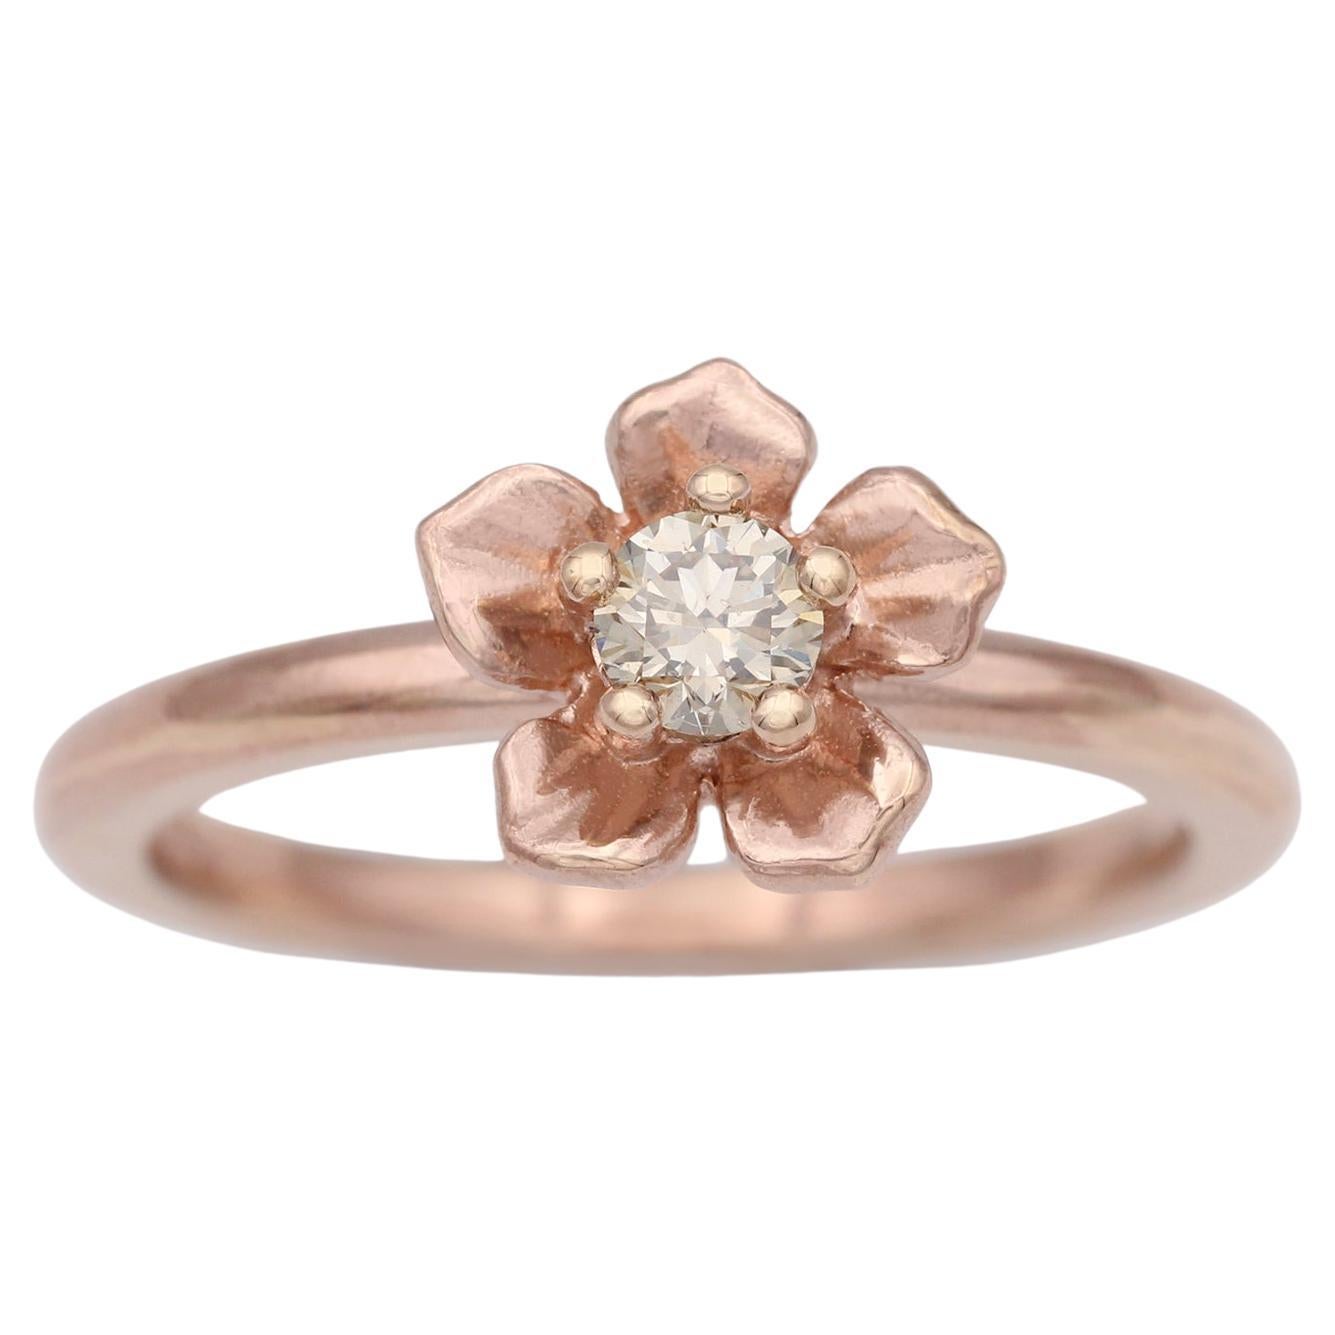 For Sale:  Forget Me Not Ring/ 9ct Rose Gold, Champagne Diamond